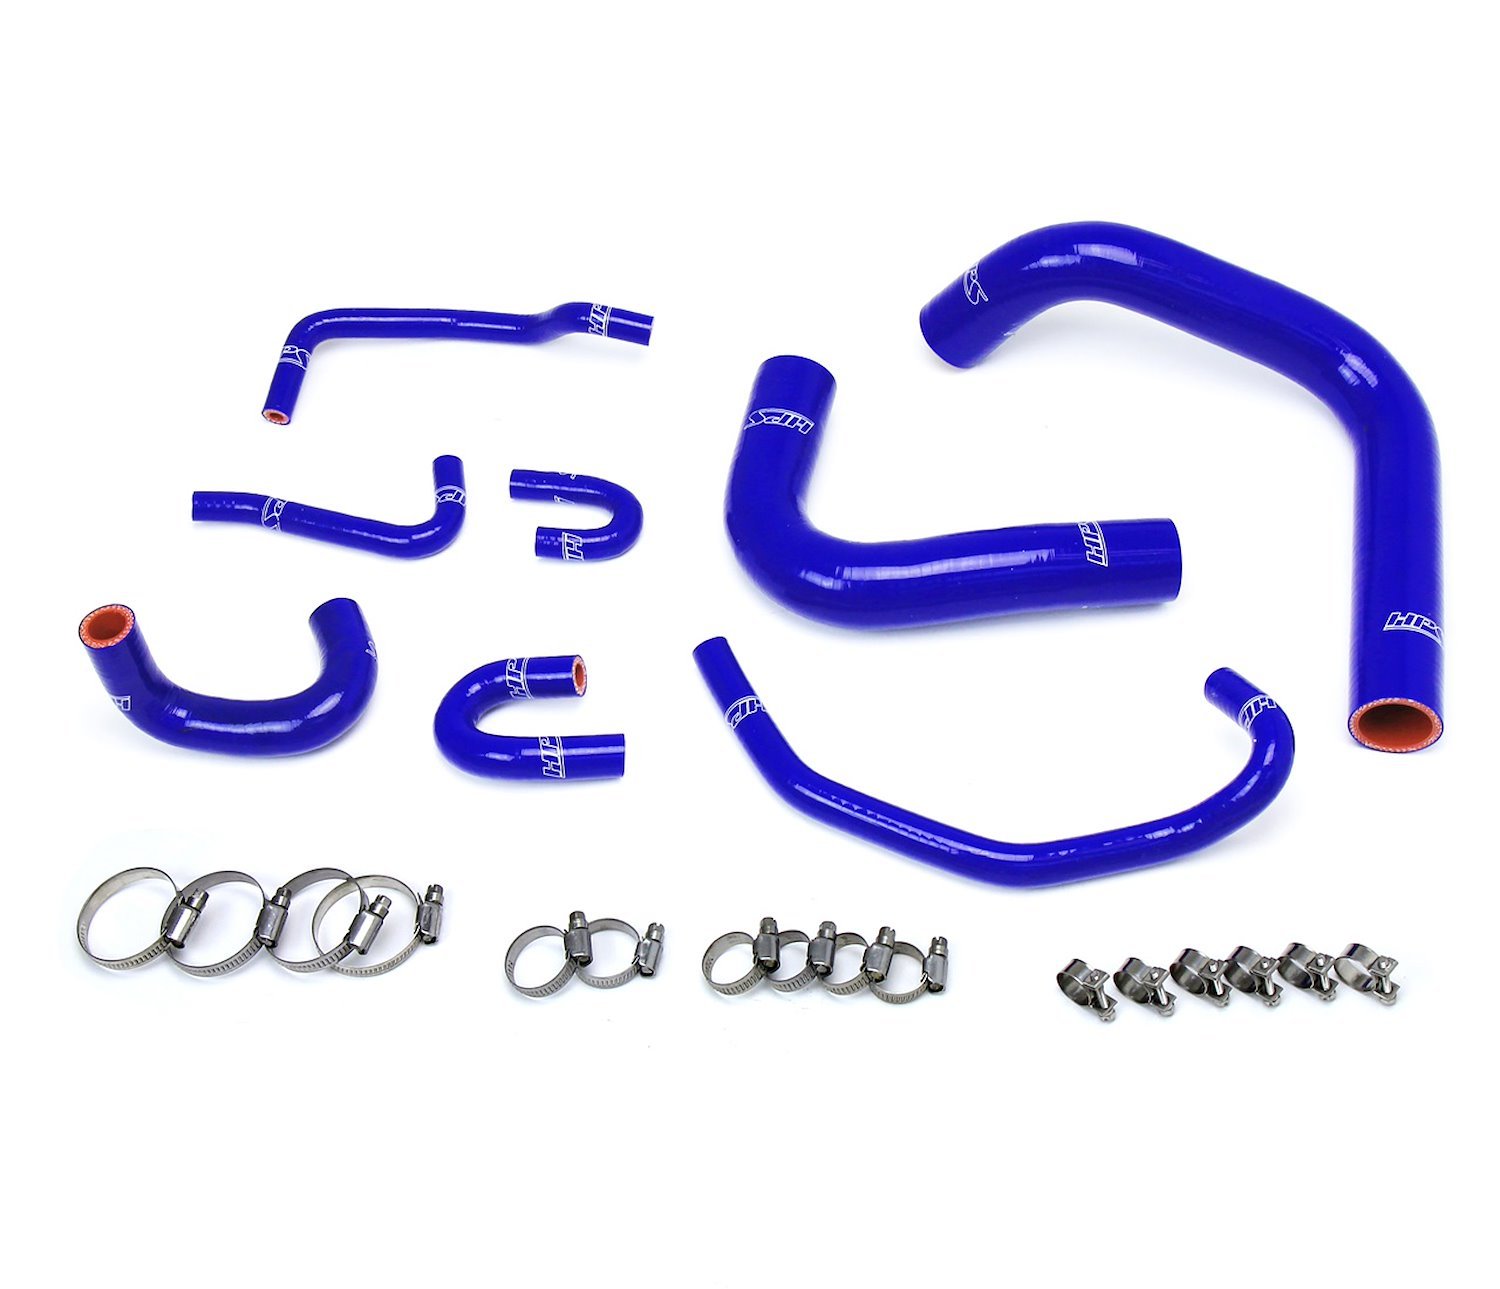 57-1323R-BLUE Radiator Hose Kit, High-Temp 3-Ply Reinforced Silicone, Replace OEM Rubber Radiator Coolant Hoses